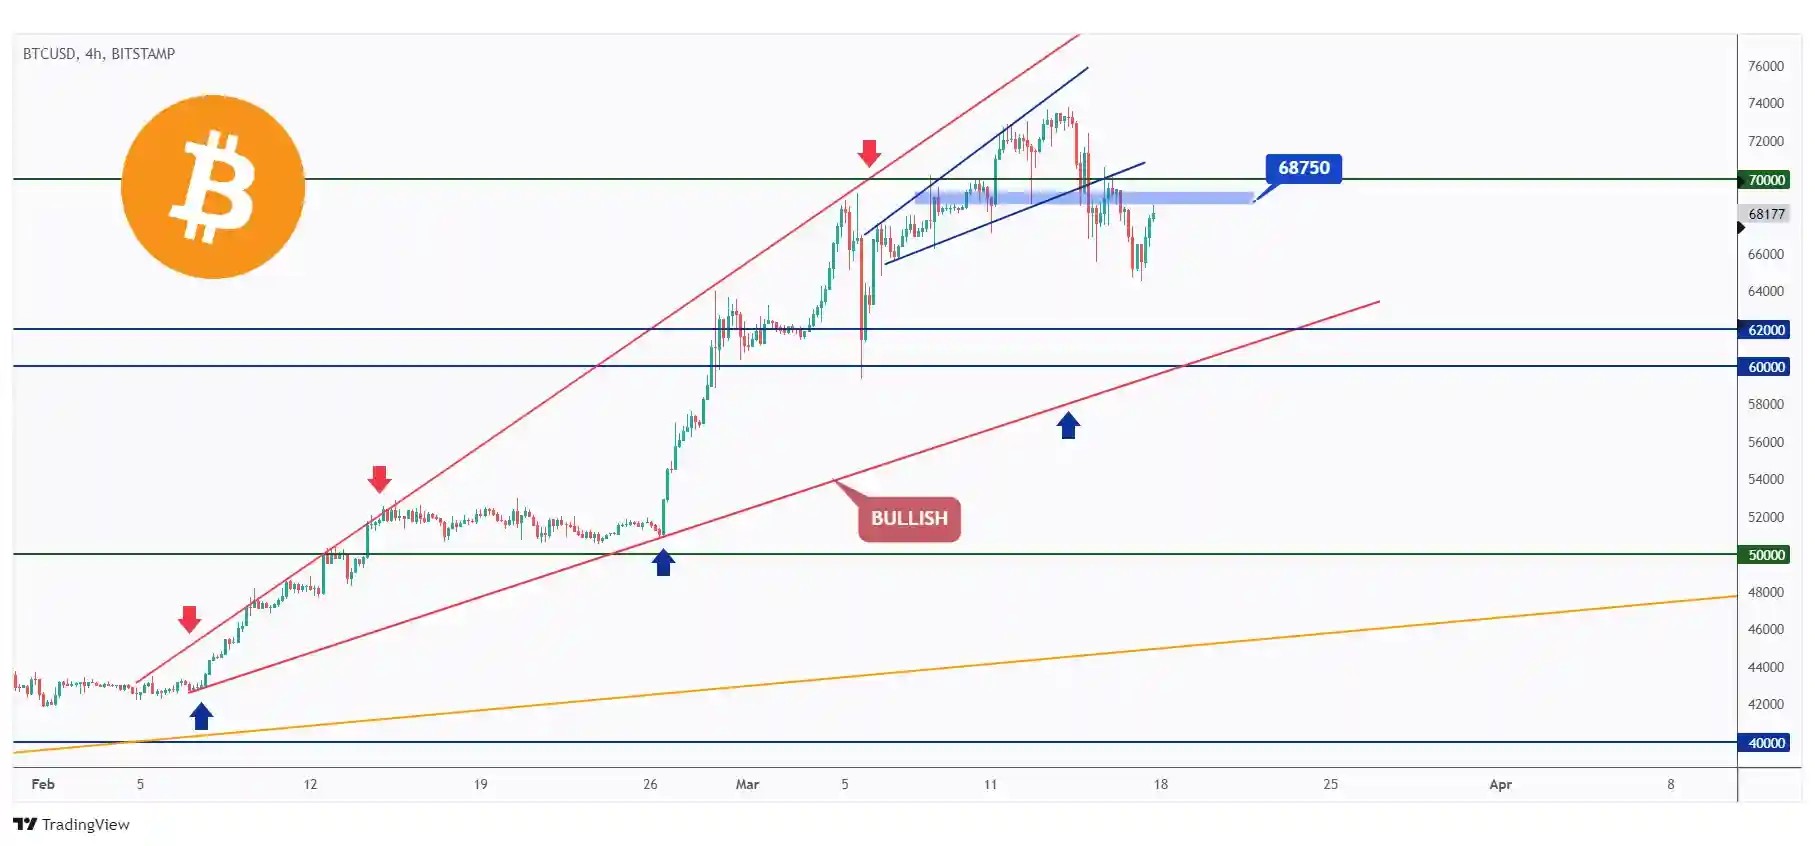 BTC 4h chart retesting a strong previous major low at $68,750.